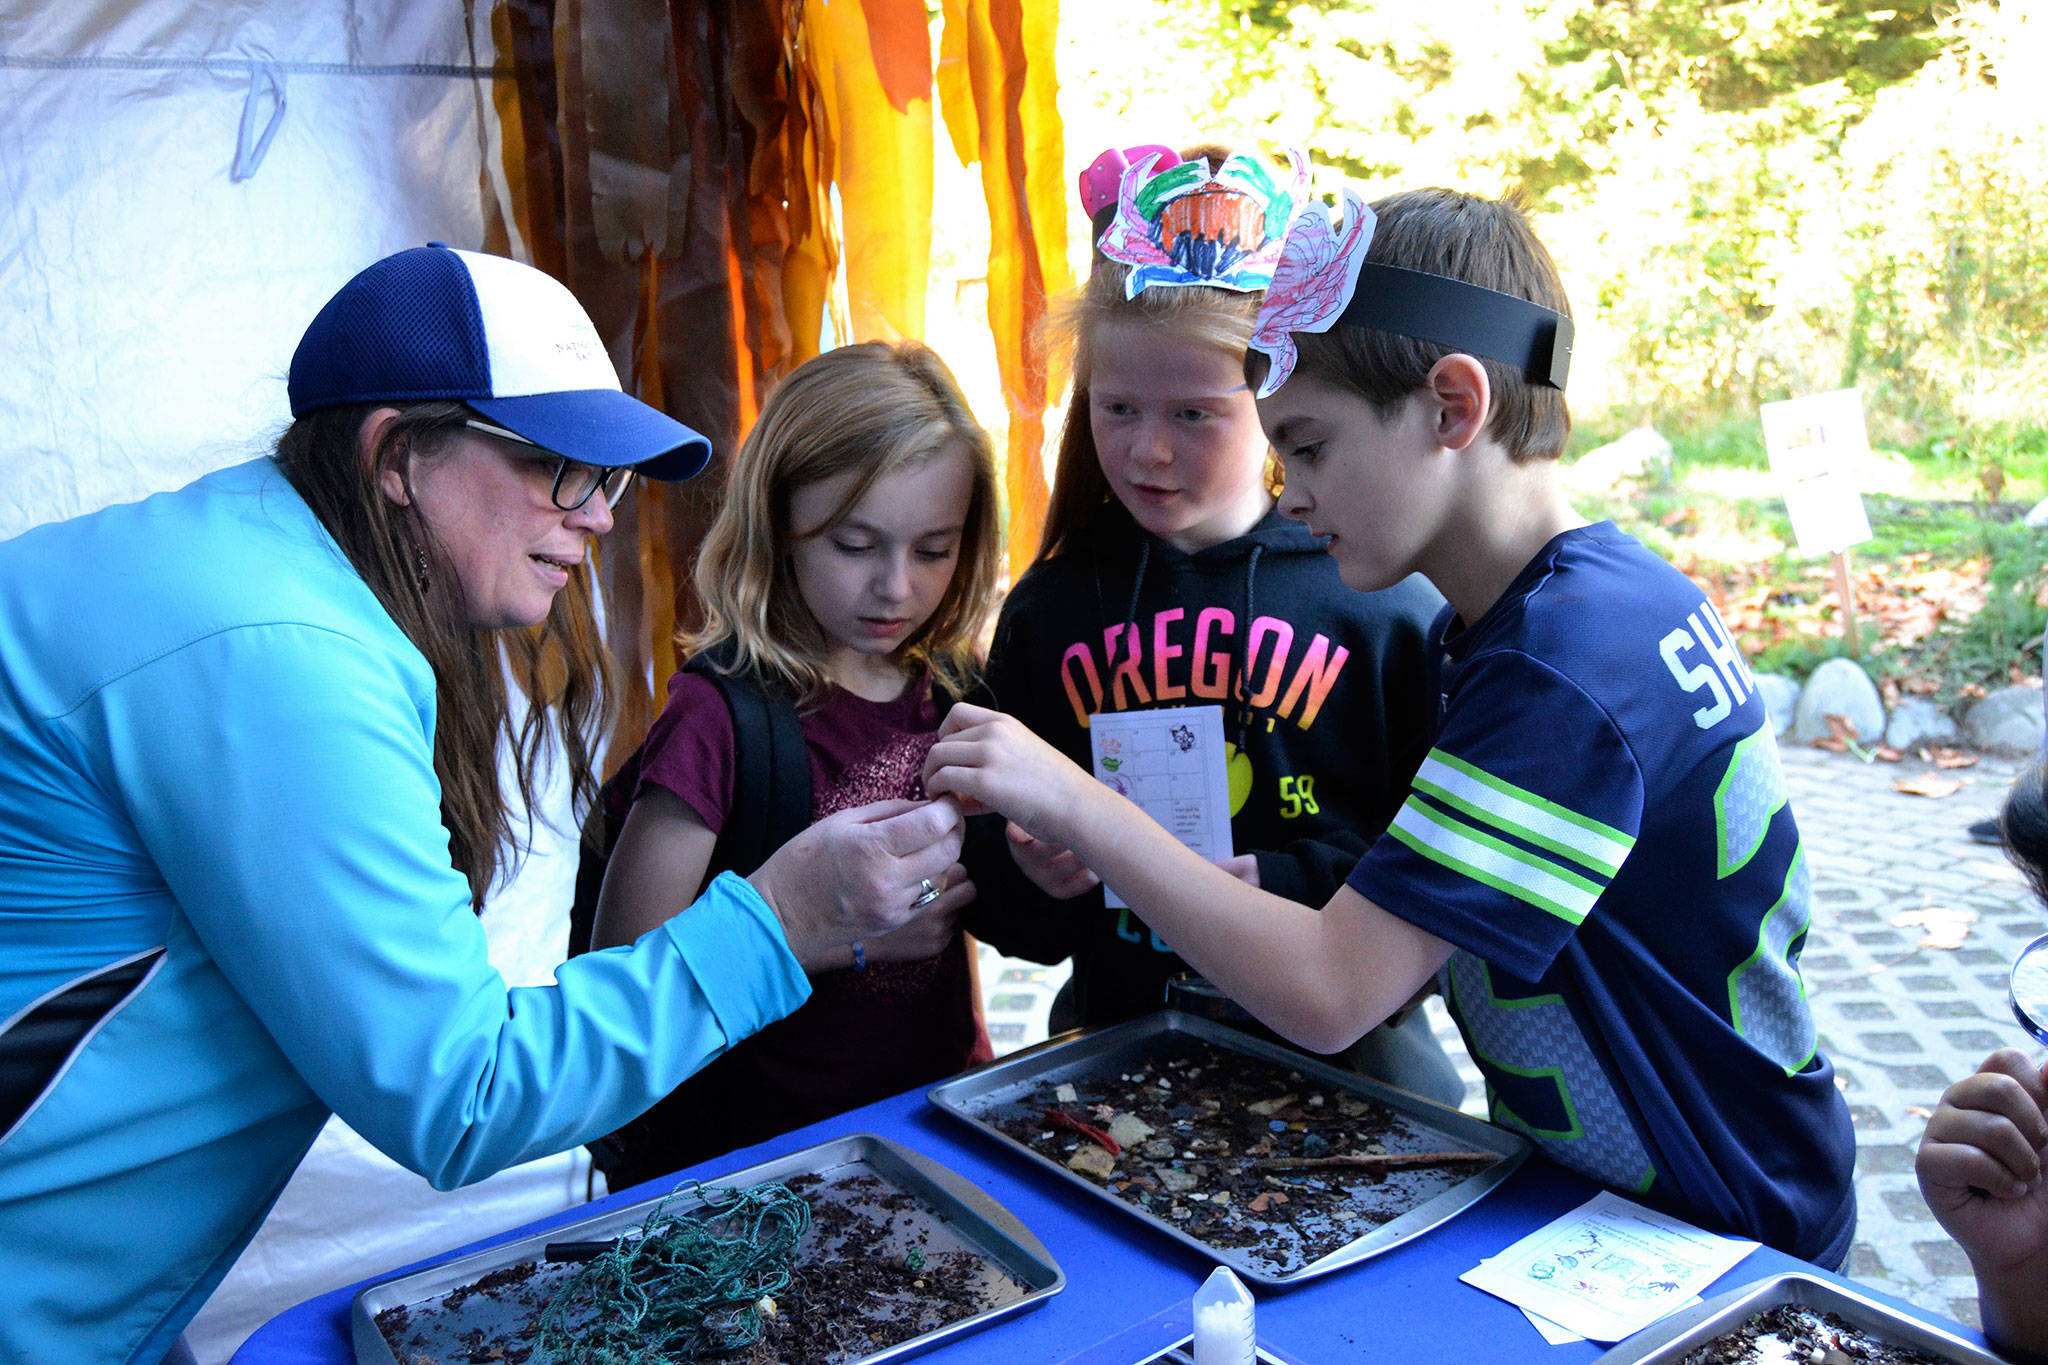 Nicole Harris, education and outreach specialist for the National Marine Sanctuary, speaks with students, from left, Annmarie Tillman, Paxtin Gagner, and Mikhail Brooks during the Dungeness River Festival. Sequim Gazette photo by Matthew Nash